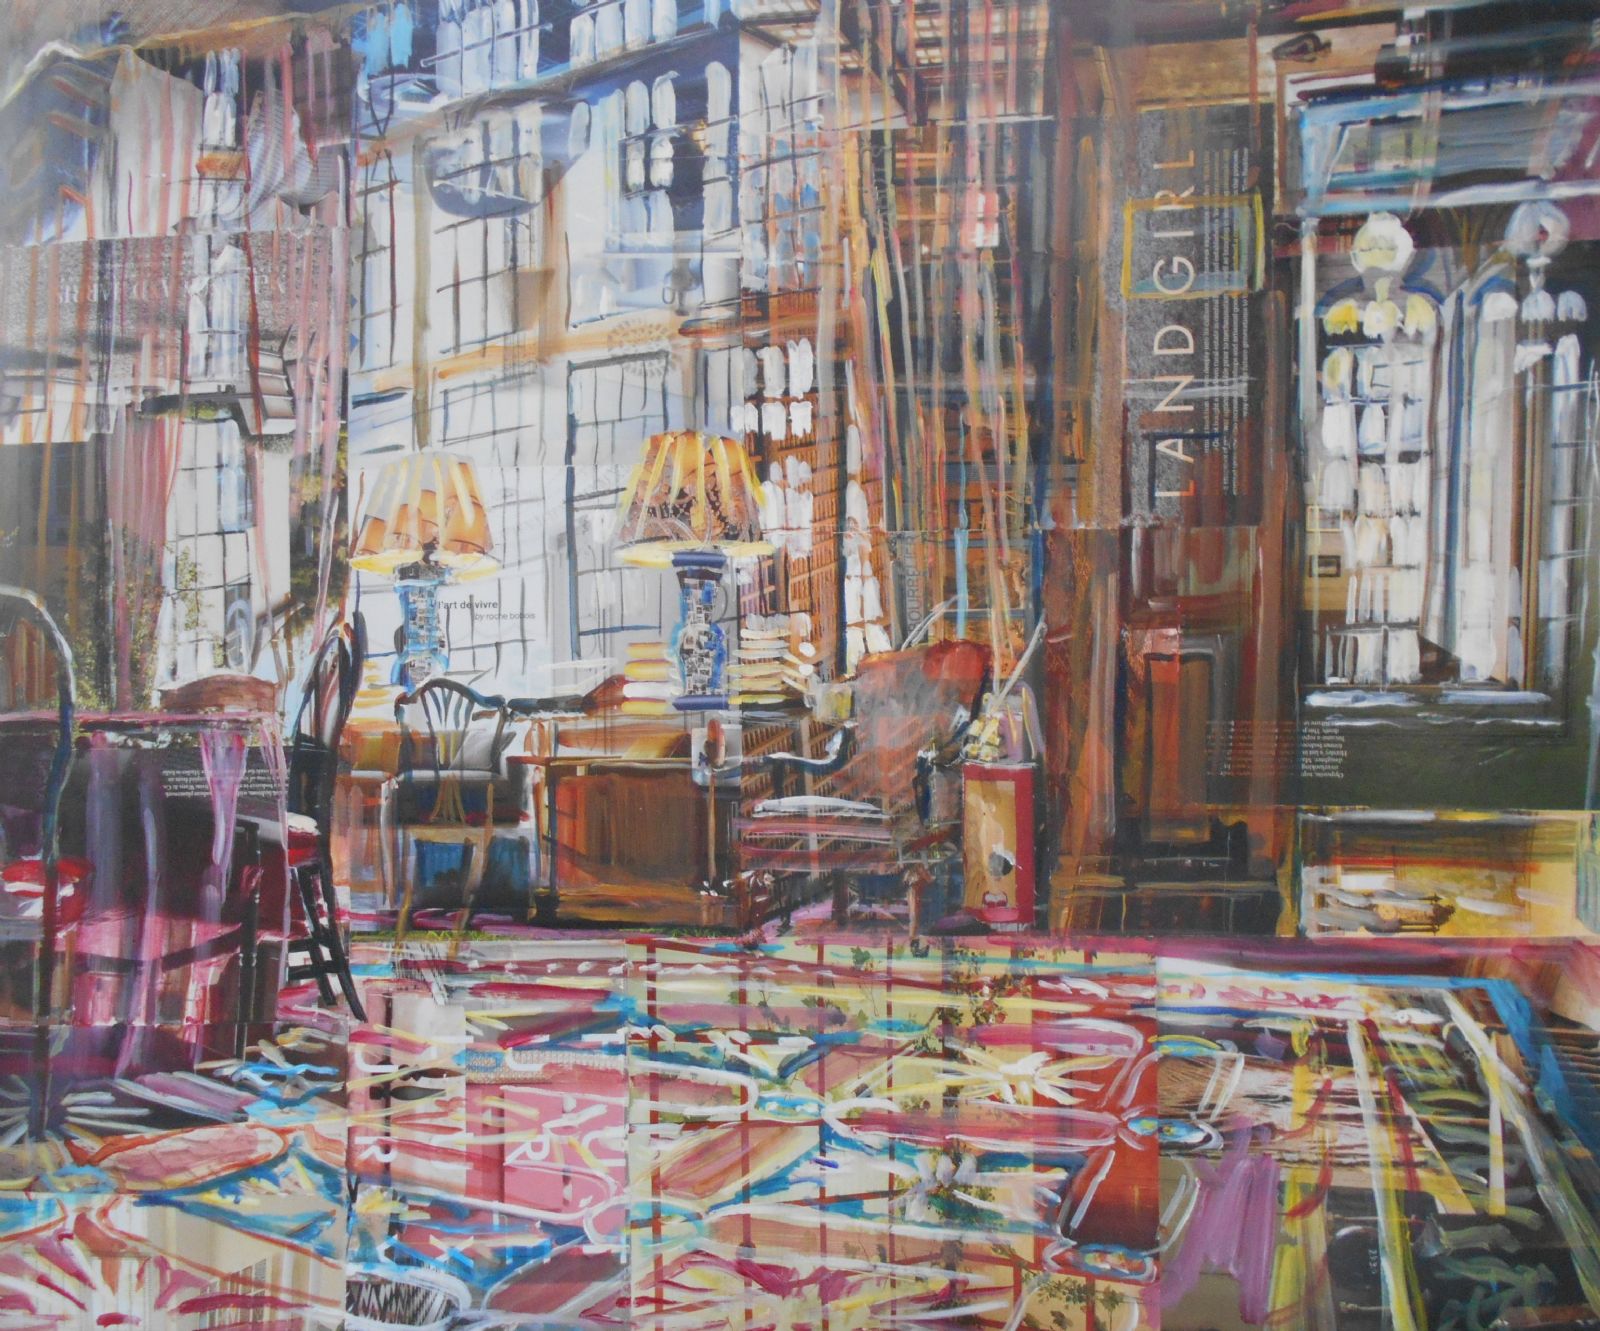 Merchant Taylor’s Hall, Library (landgirl) by Alison Pullen